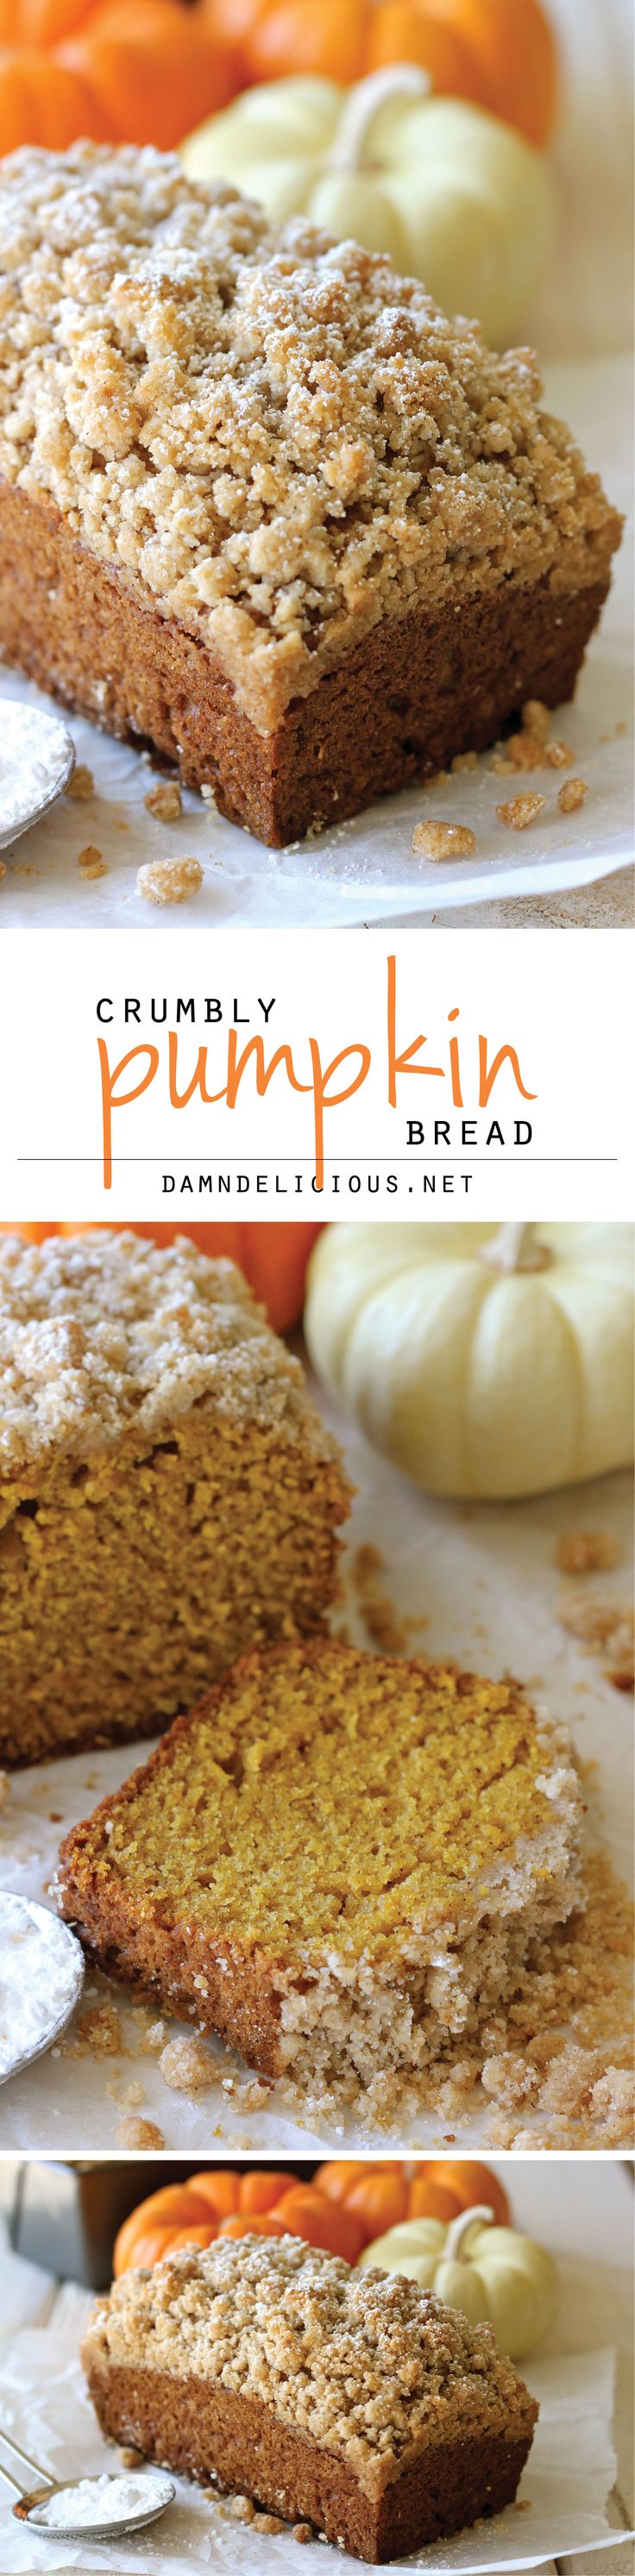 Crumbly Pumpkin Bread - With lightened-up options, this can be eaten guilt-free! And the crumb topping is out of this world amazing! Love this pumpkin dessert recipe / homemade bread recipe!